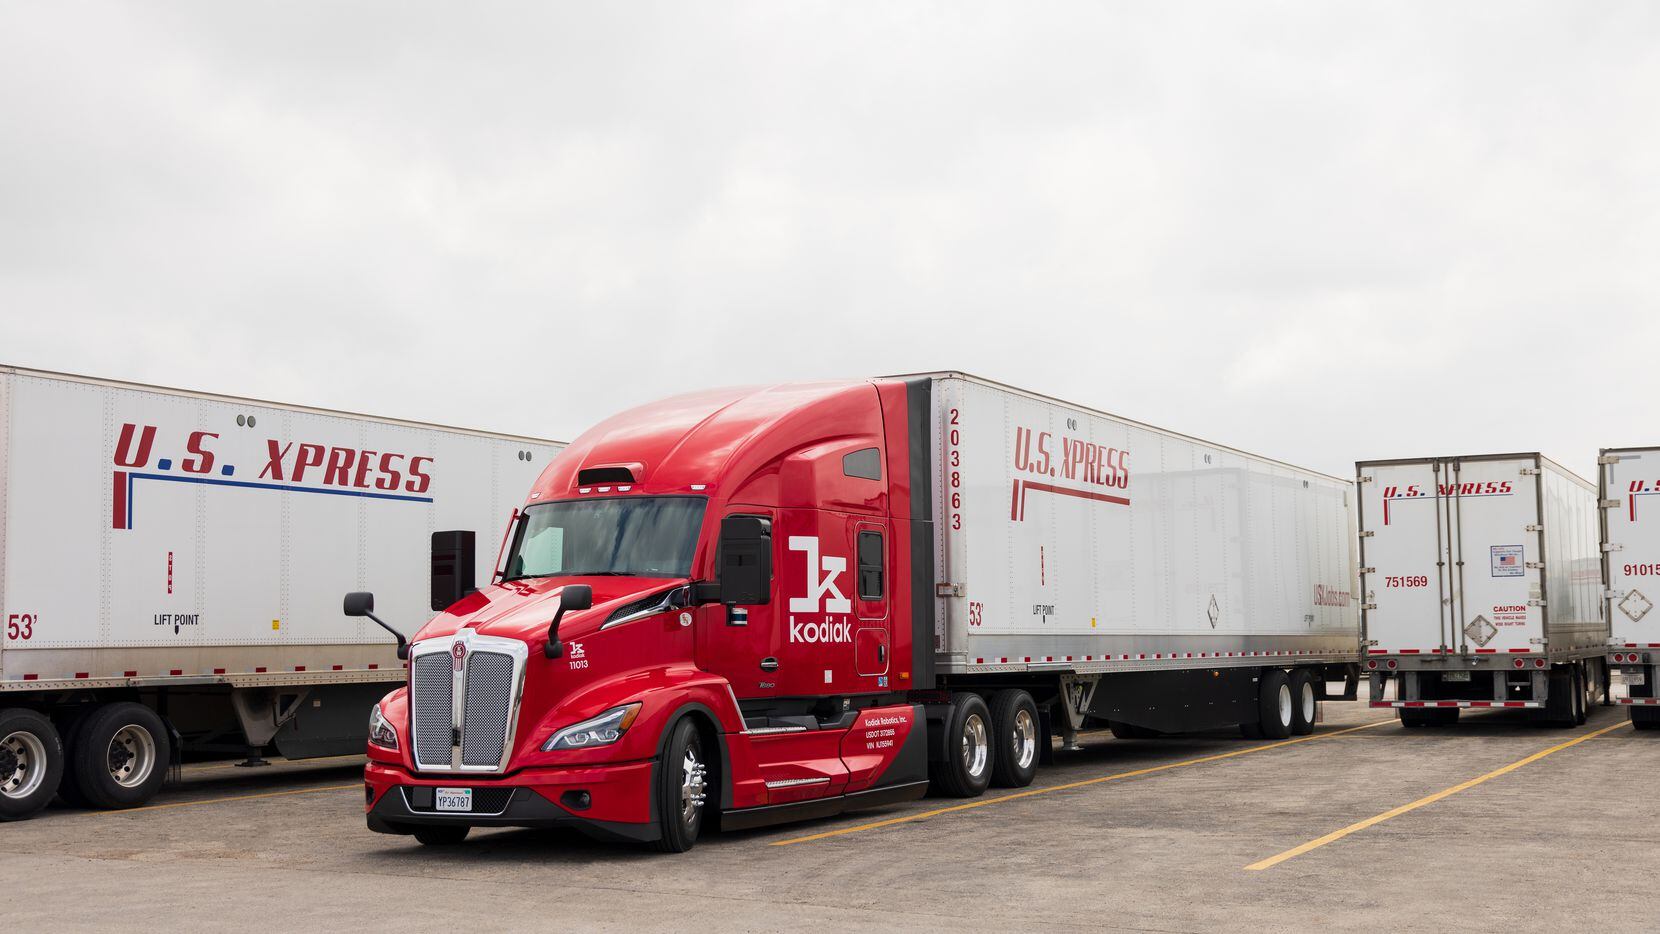 During test runs in March, a Kodiak autonomous semi-truck picked up and delivered U.S....